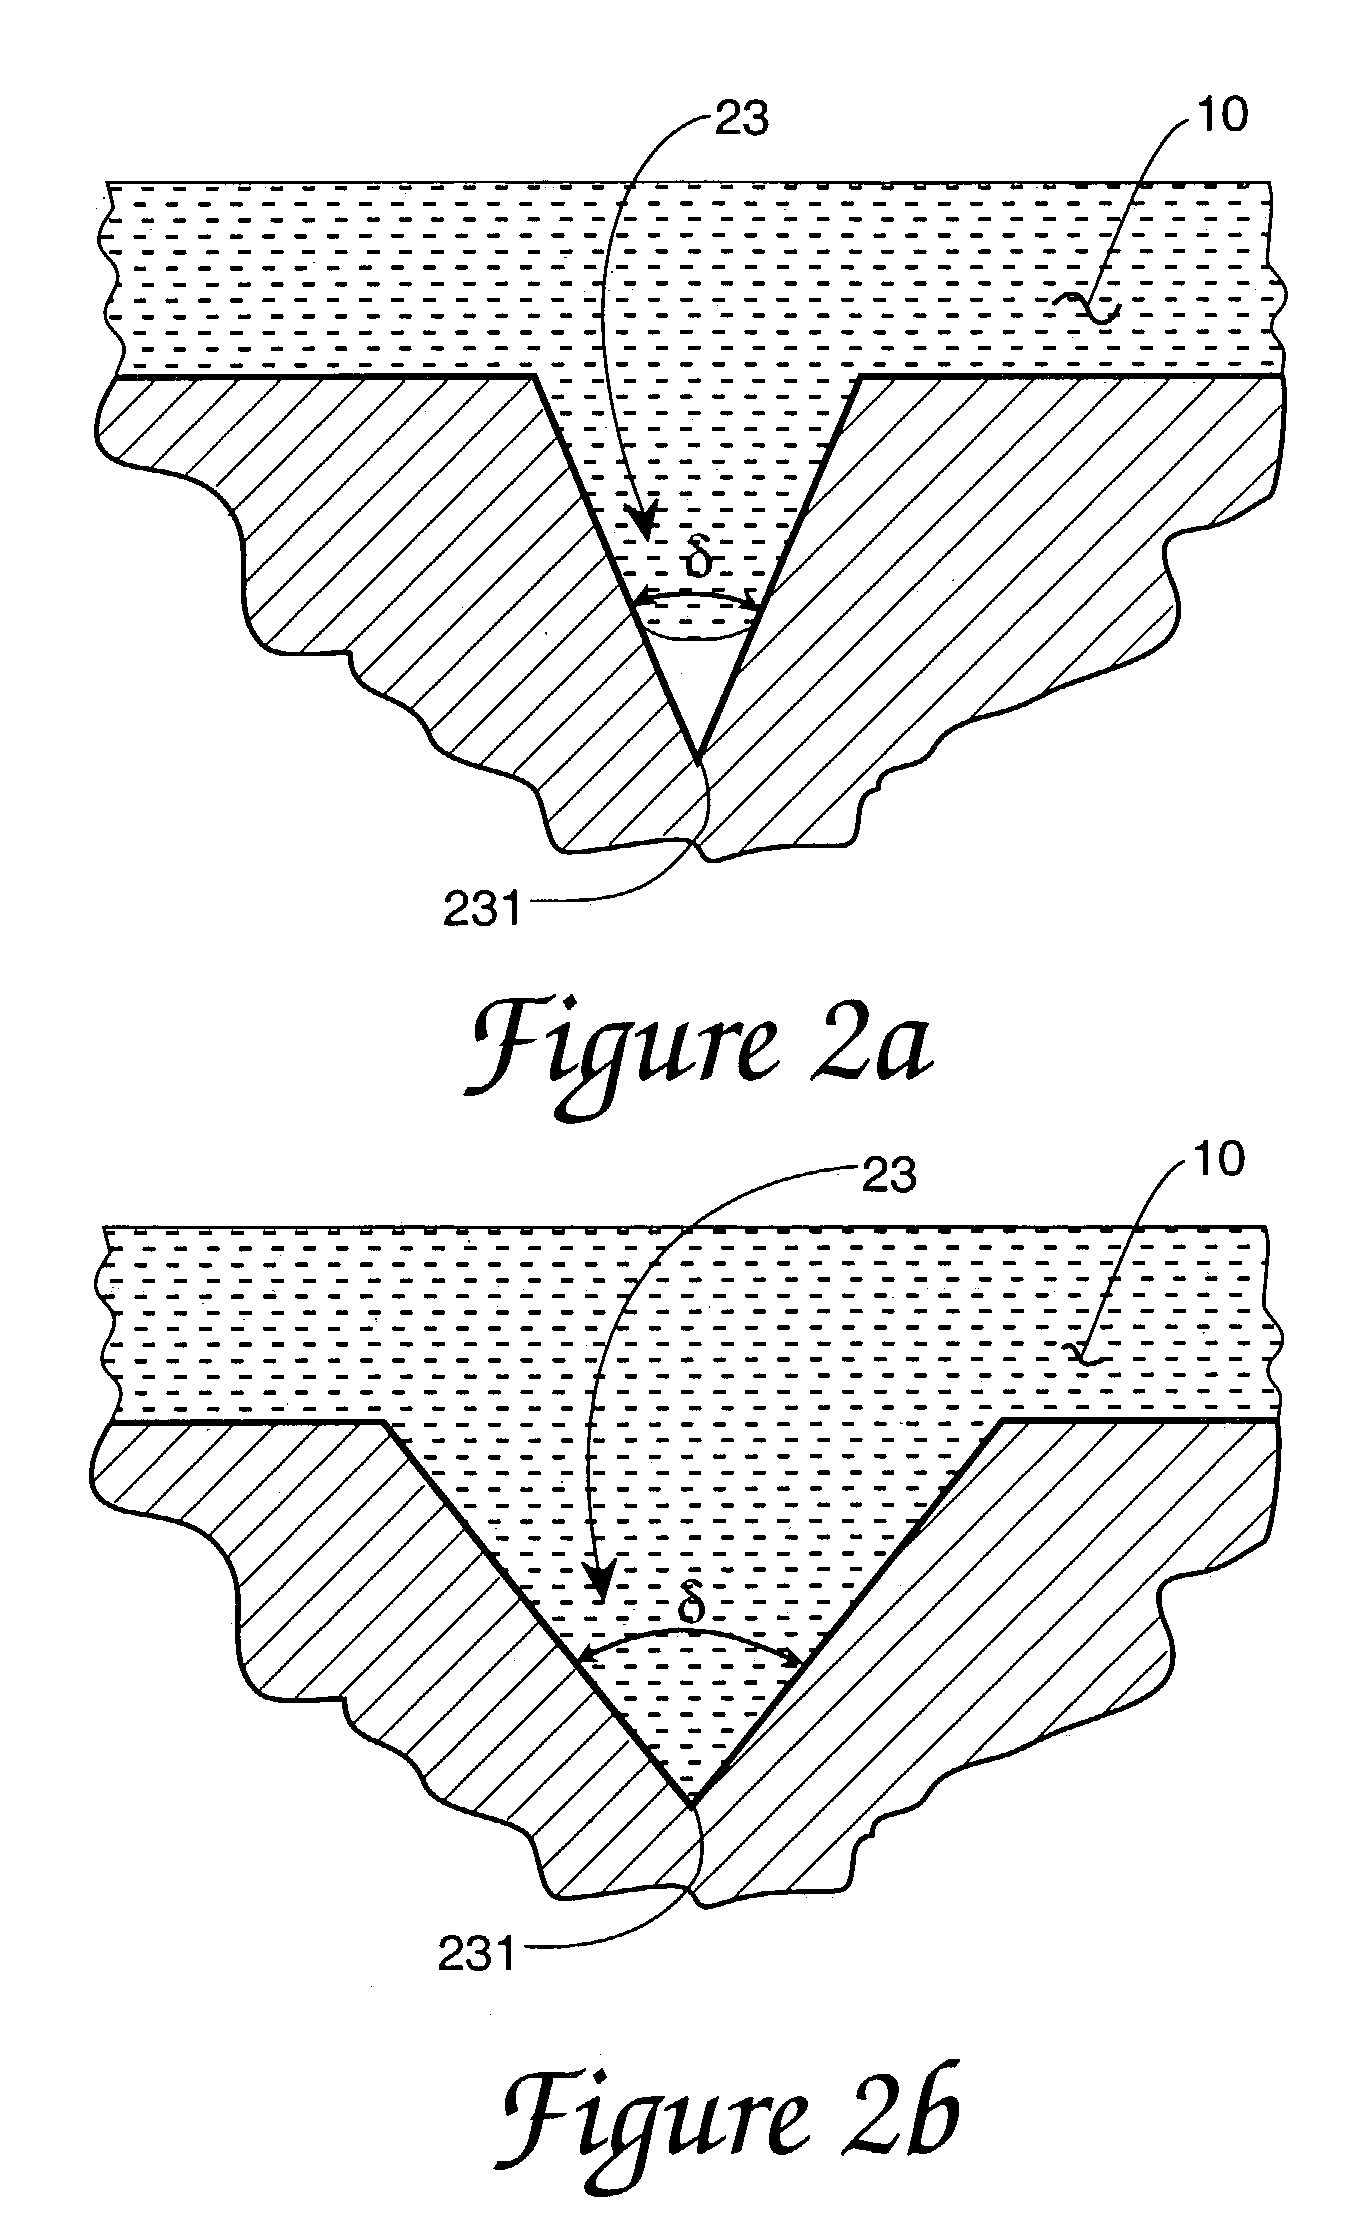 Modification of the degree of liquid contact with a solid by control of surface and micro-channel capillary geometry